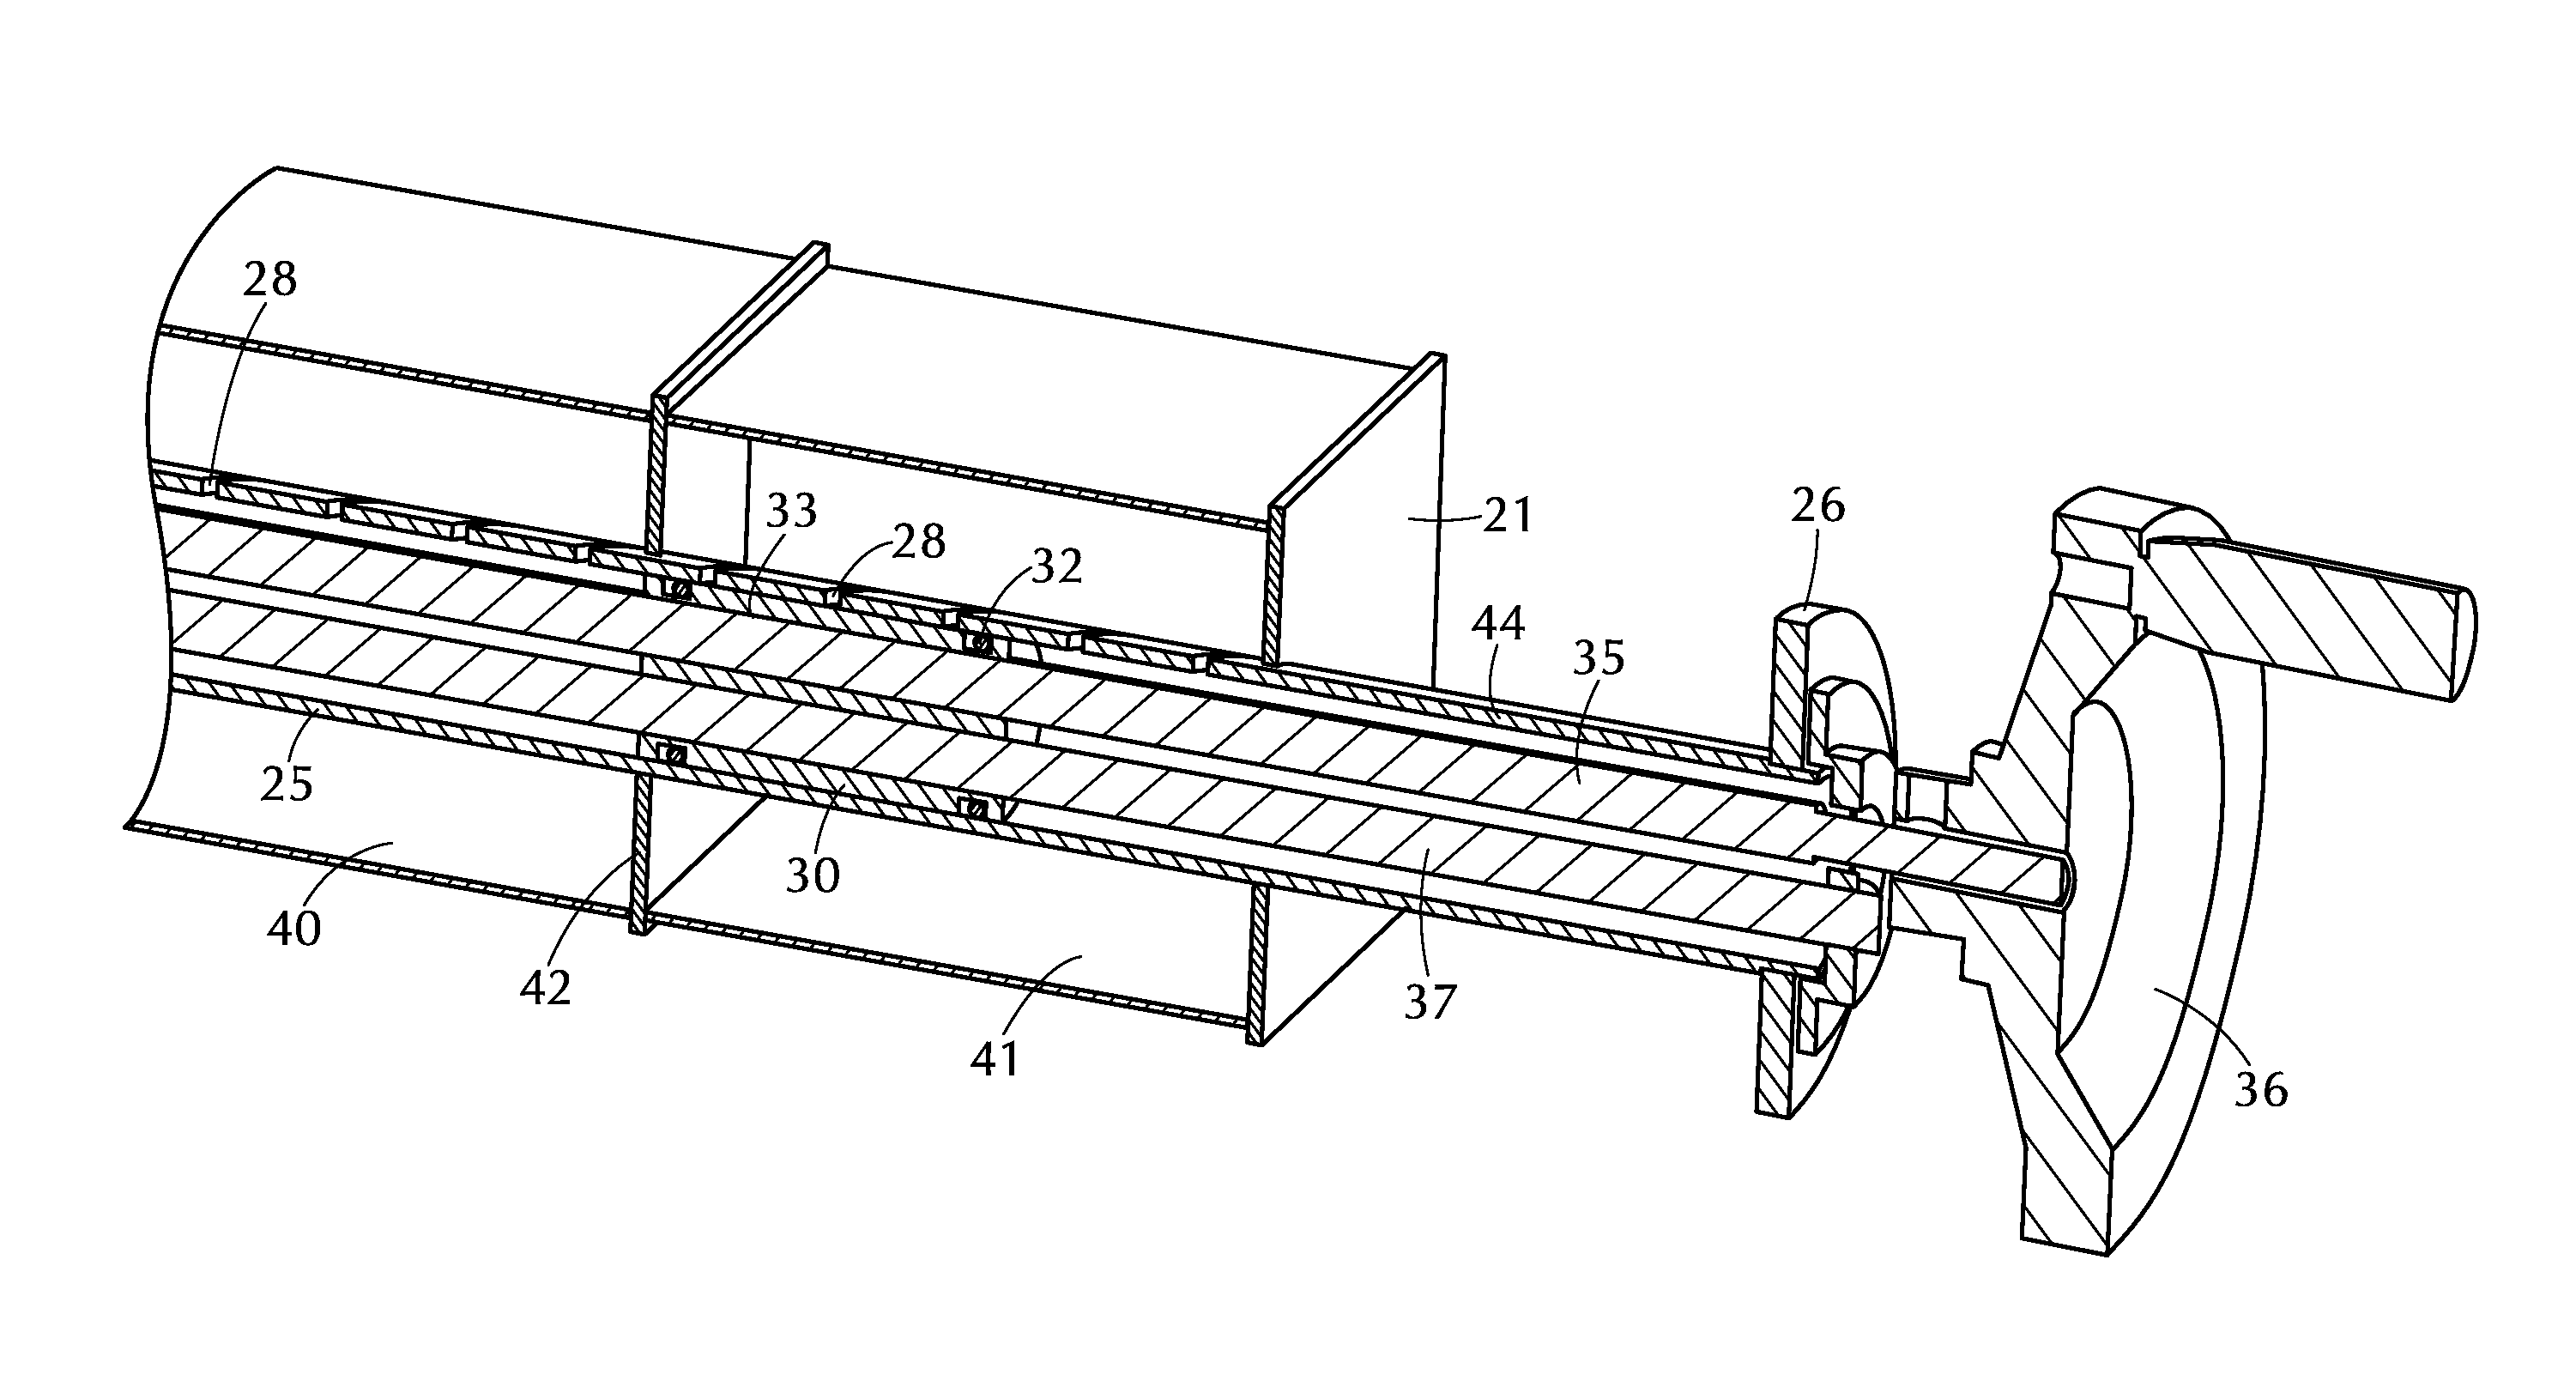 Adjustable width steam box for fabric processing and method of using the same